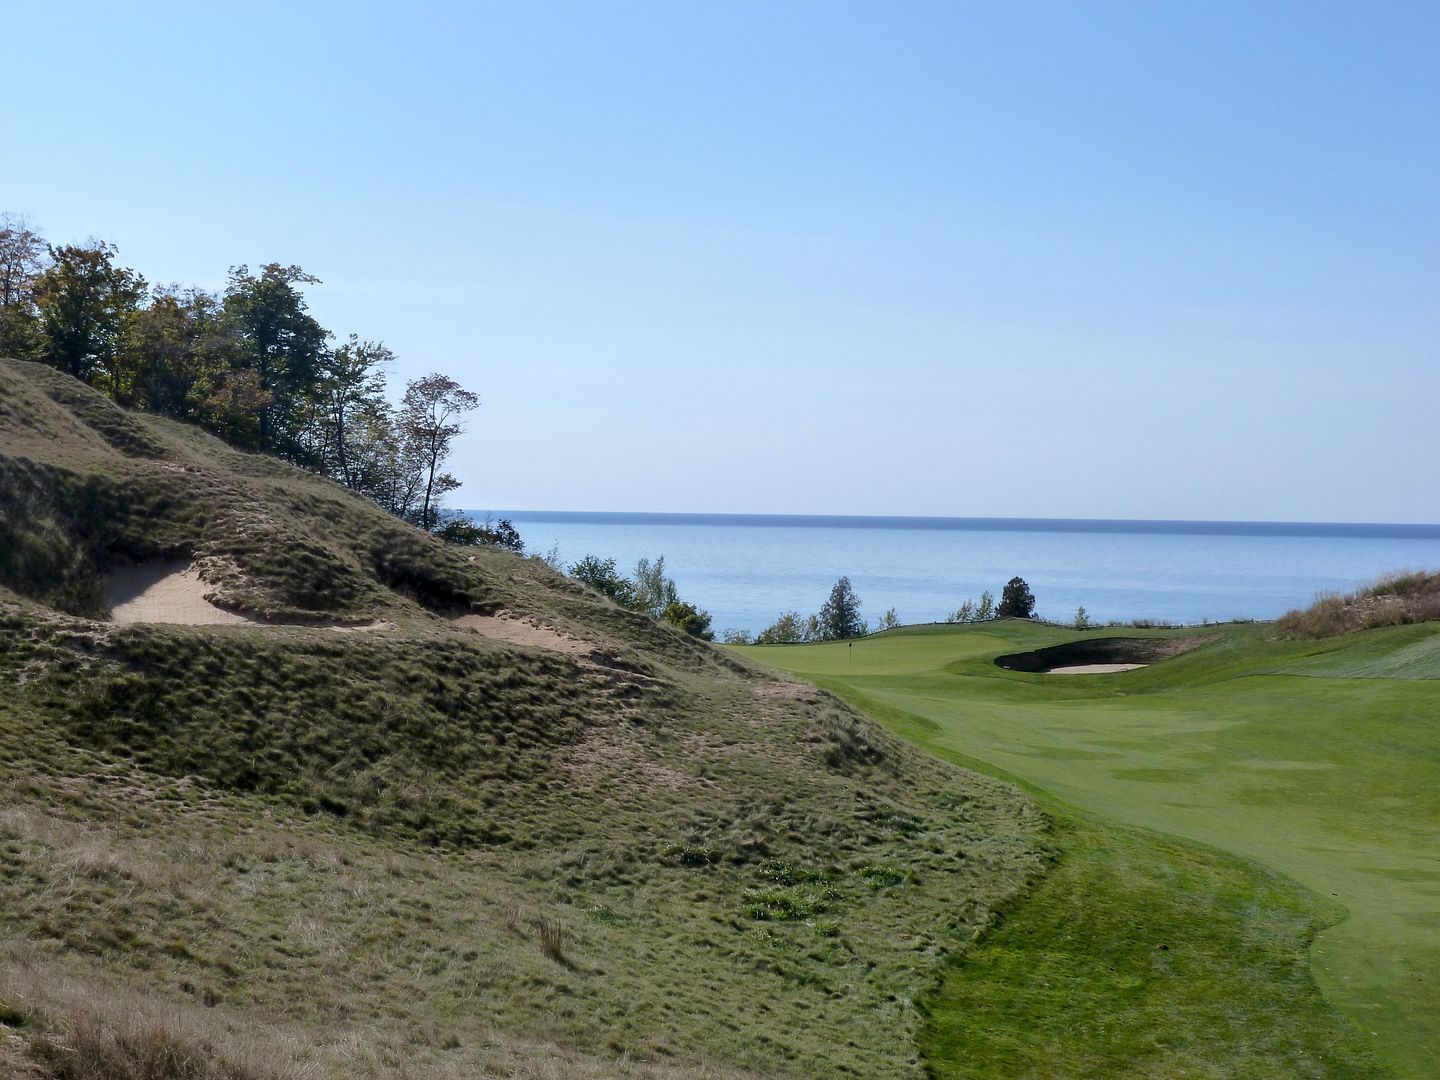 Arcadia Bluffs Pictures